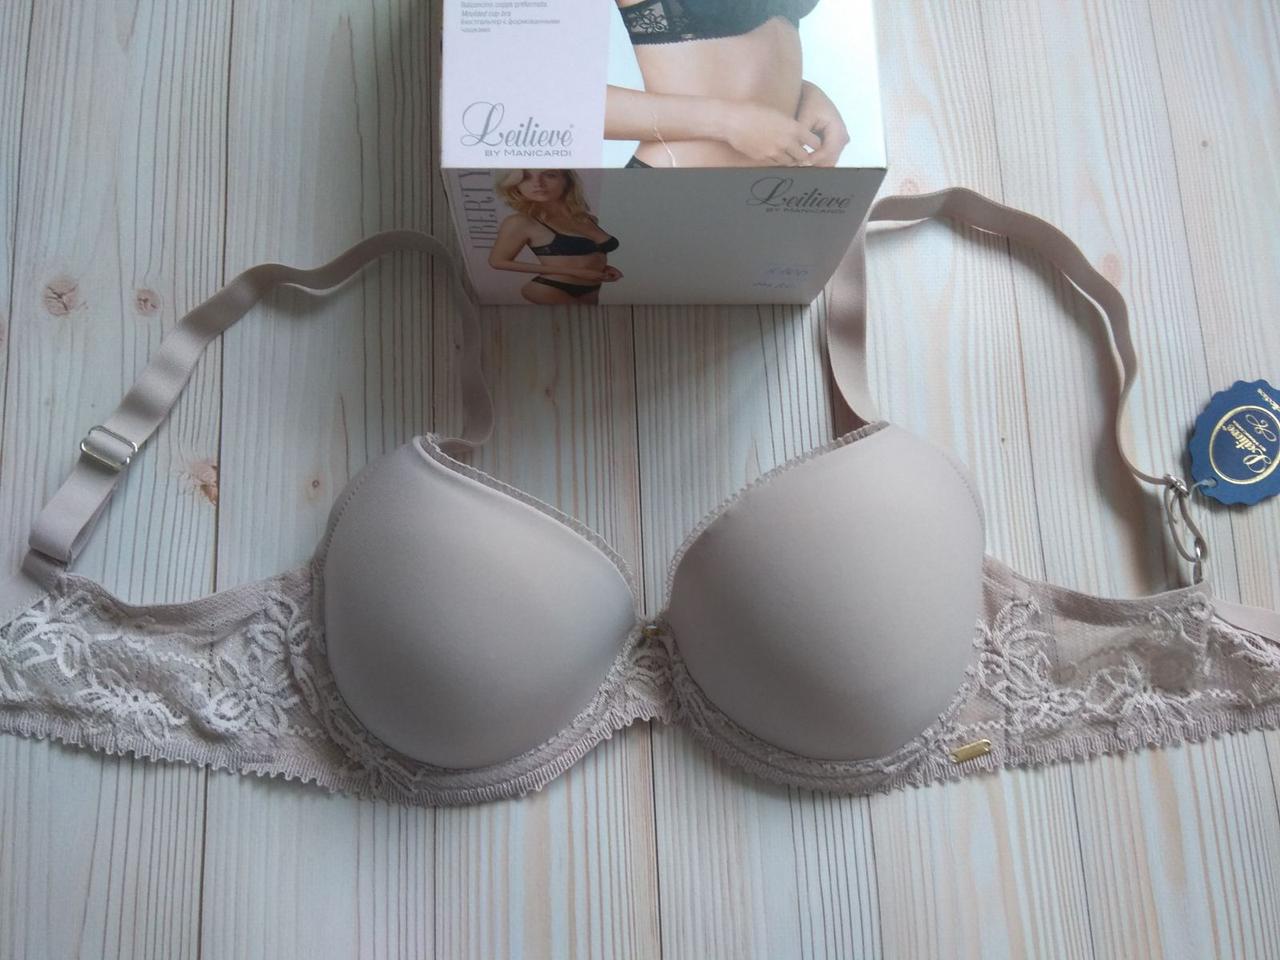 Collection Liberty - Moulded cup bra - Leilieve - Women Underwear